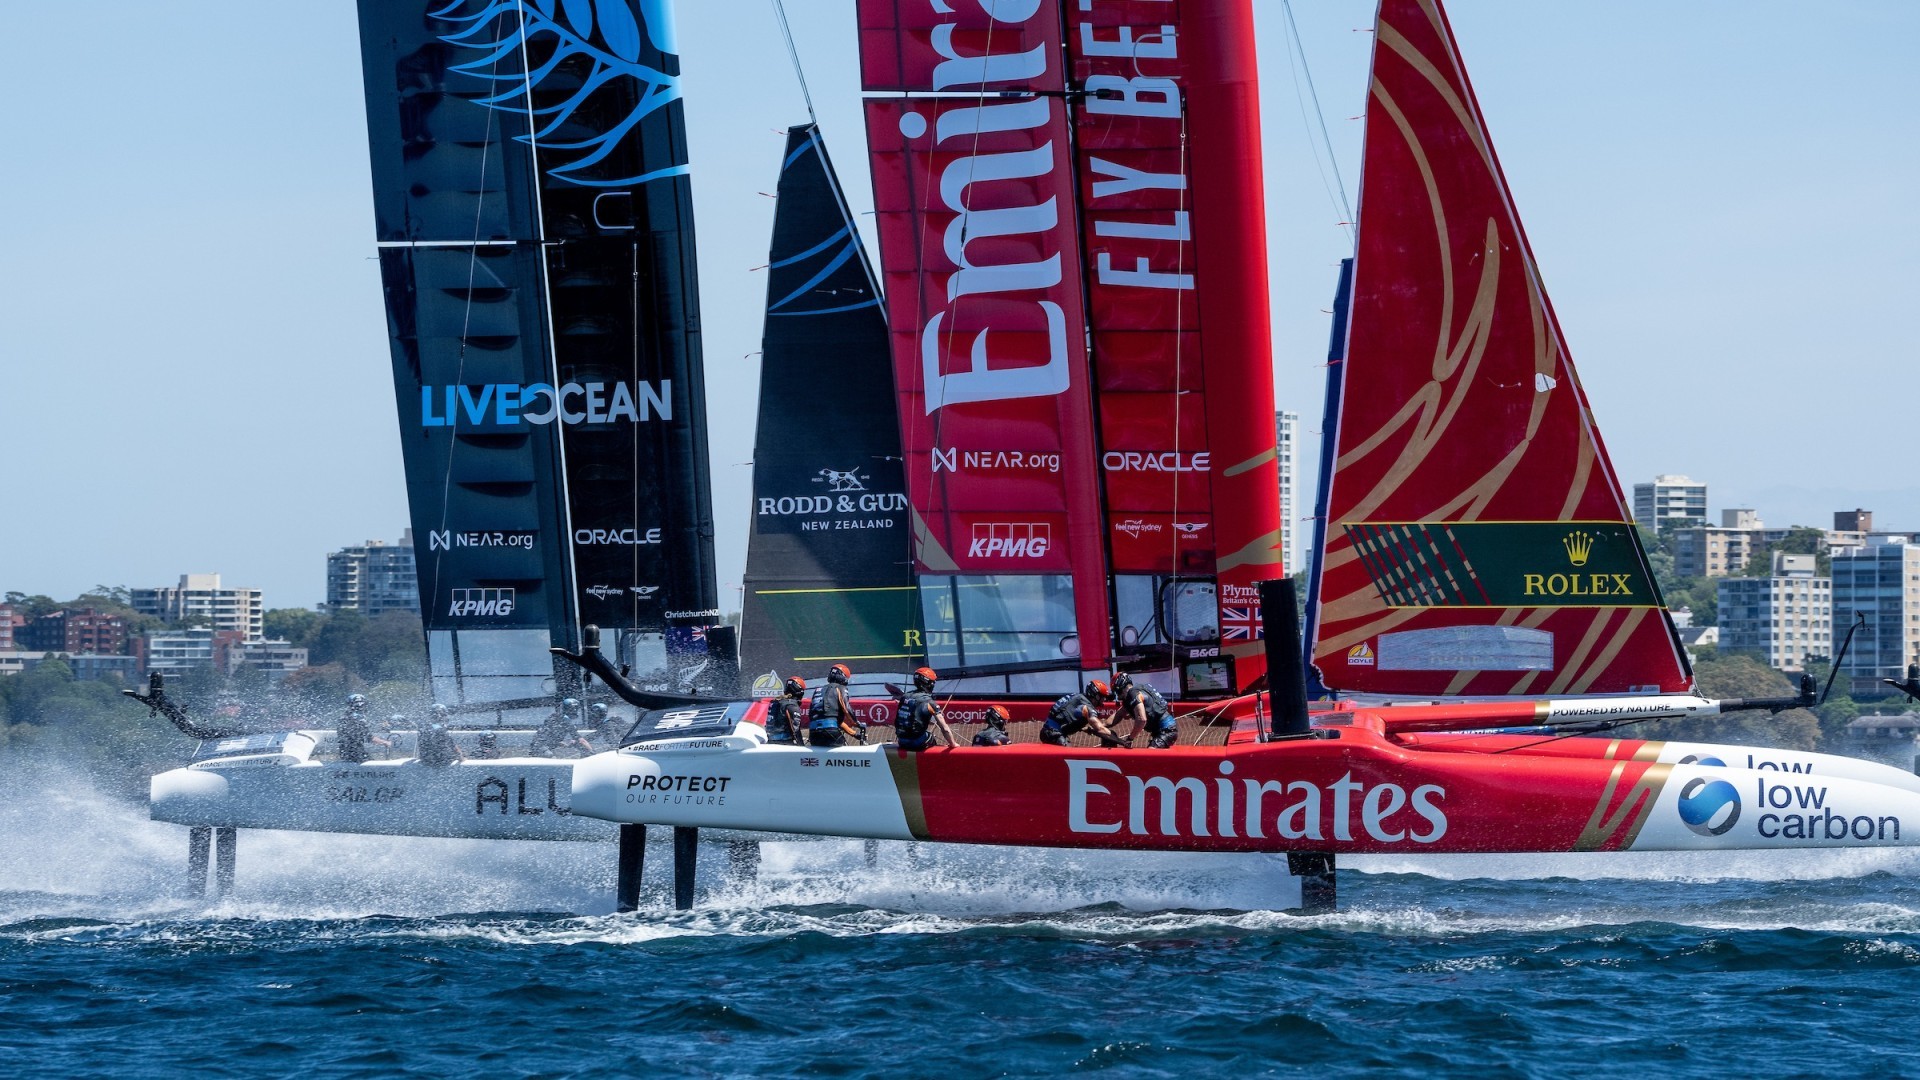 The Russell Report on the eve of NZ SailGP event